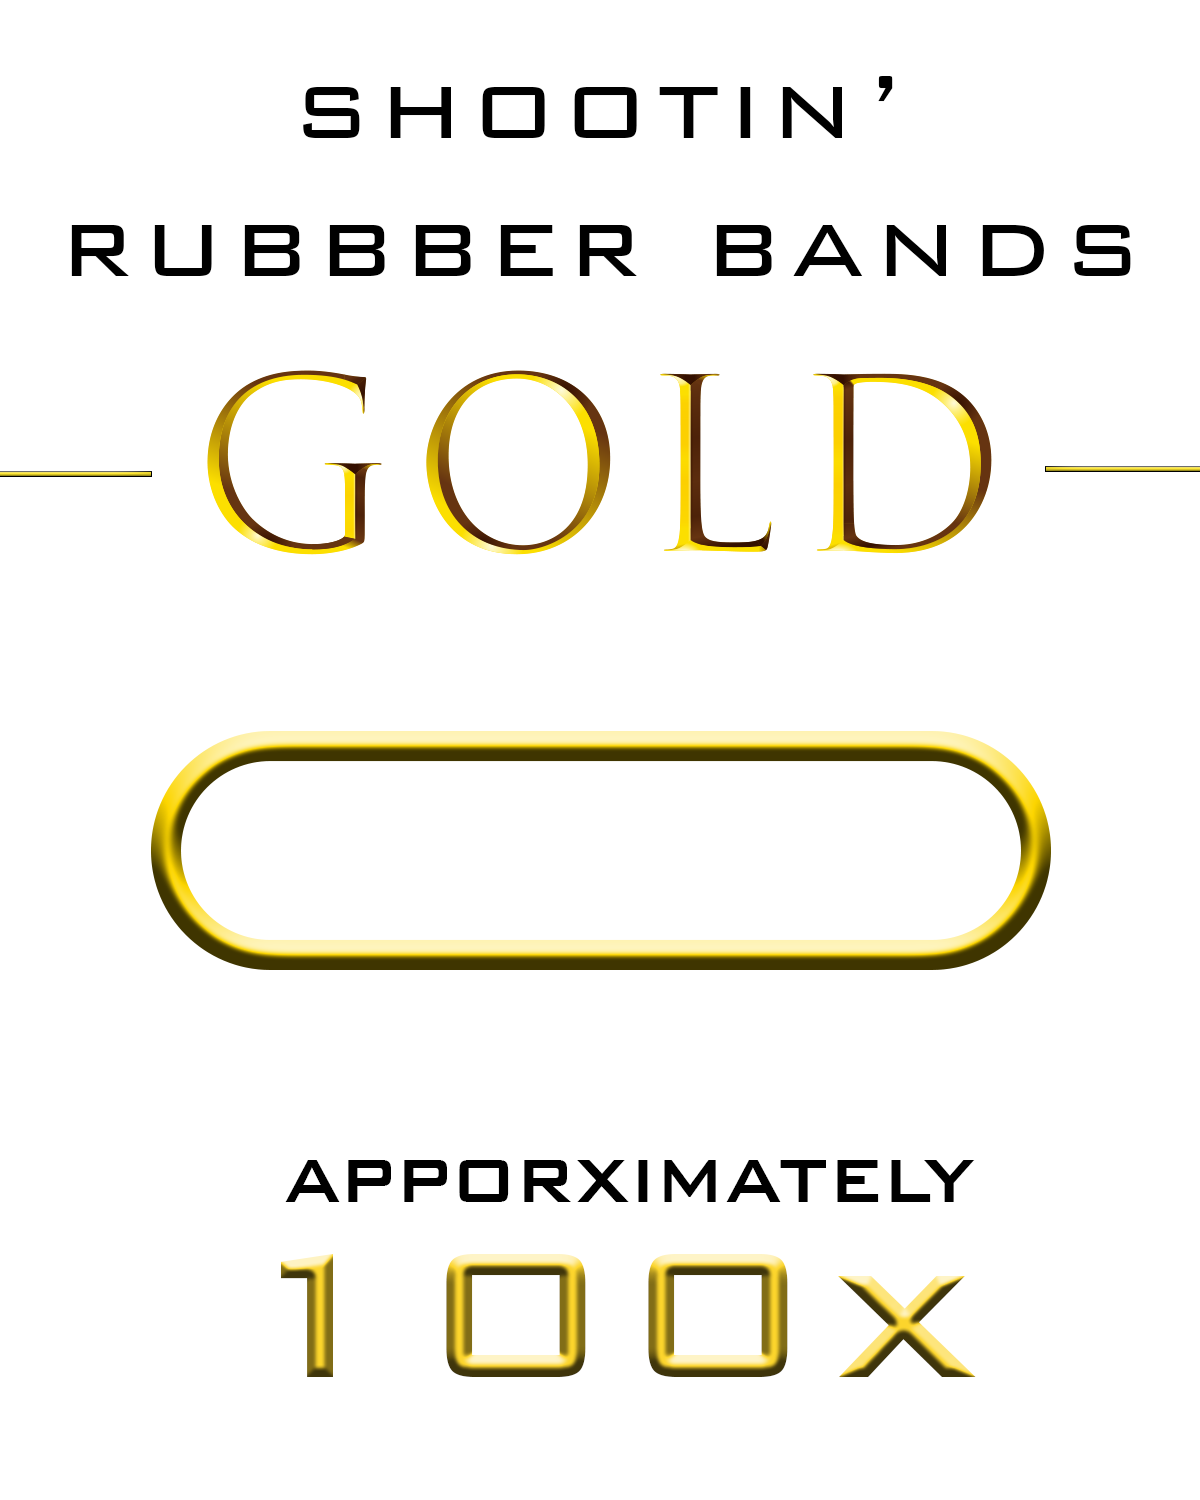 Shootin' Rubber Bands - GOLD (Approx. 100 bands)